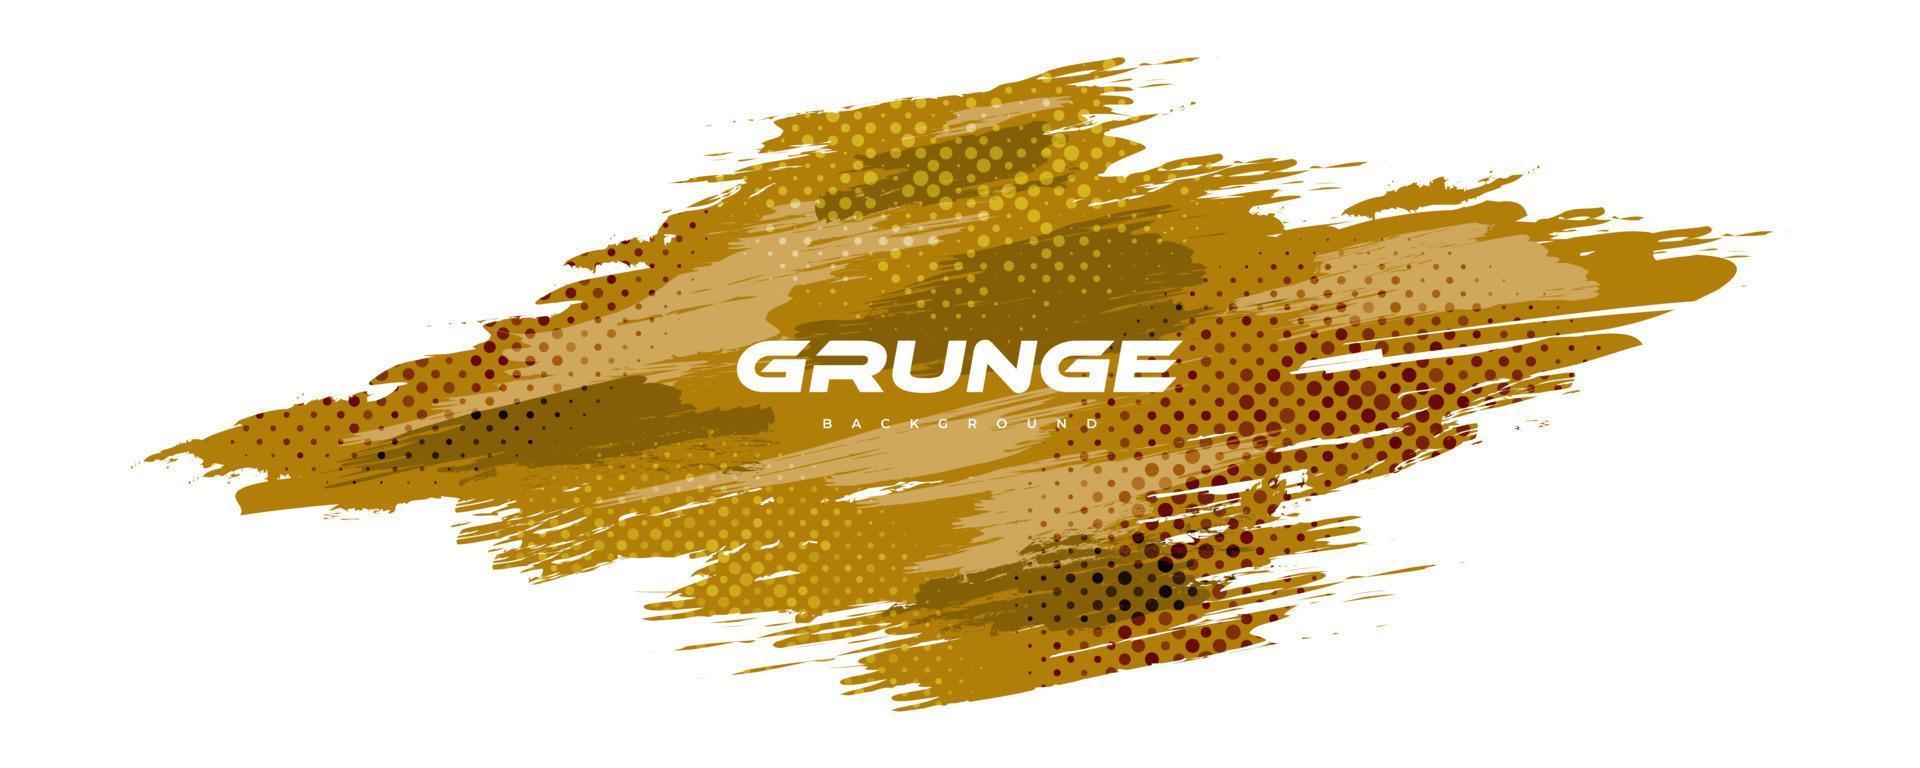 Abstract Gold and White Grunge Background with Halftone Style. Brush Stroke Illustration for Banner, Poster. Sports Background. Scratch and Texture Elements For Design vector